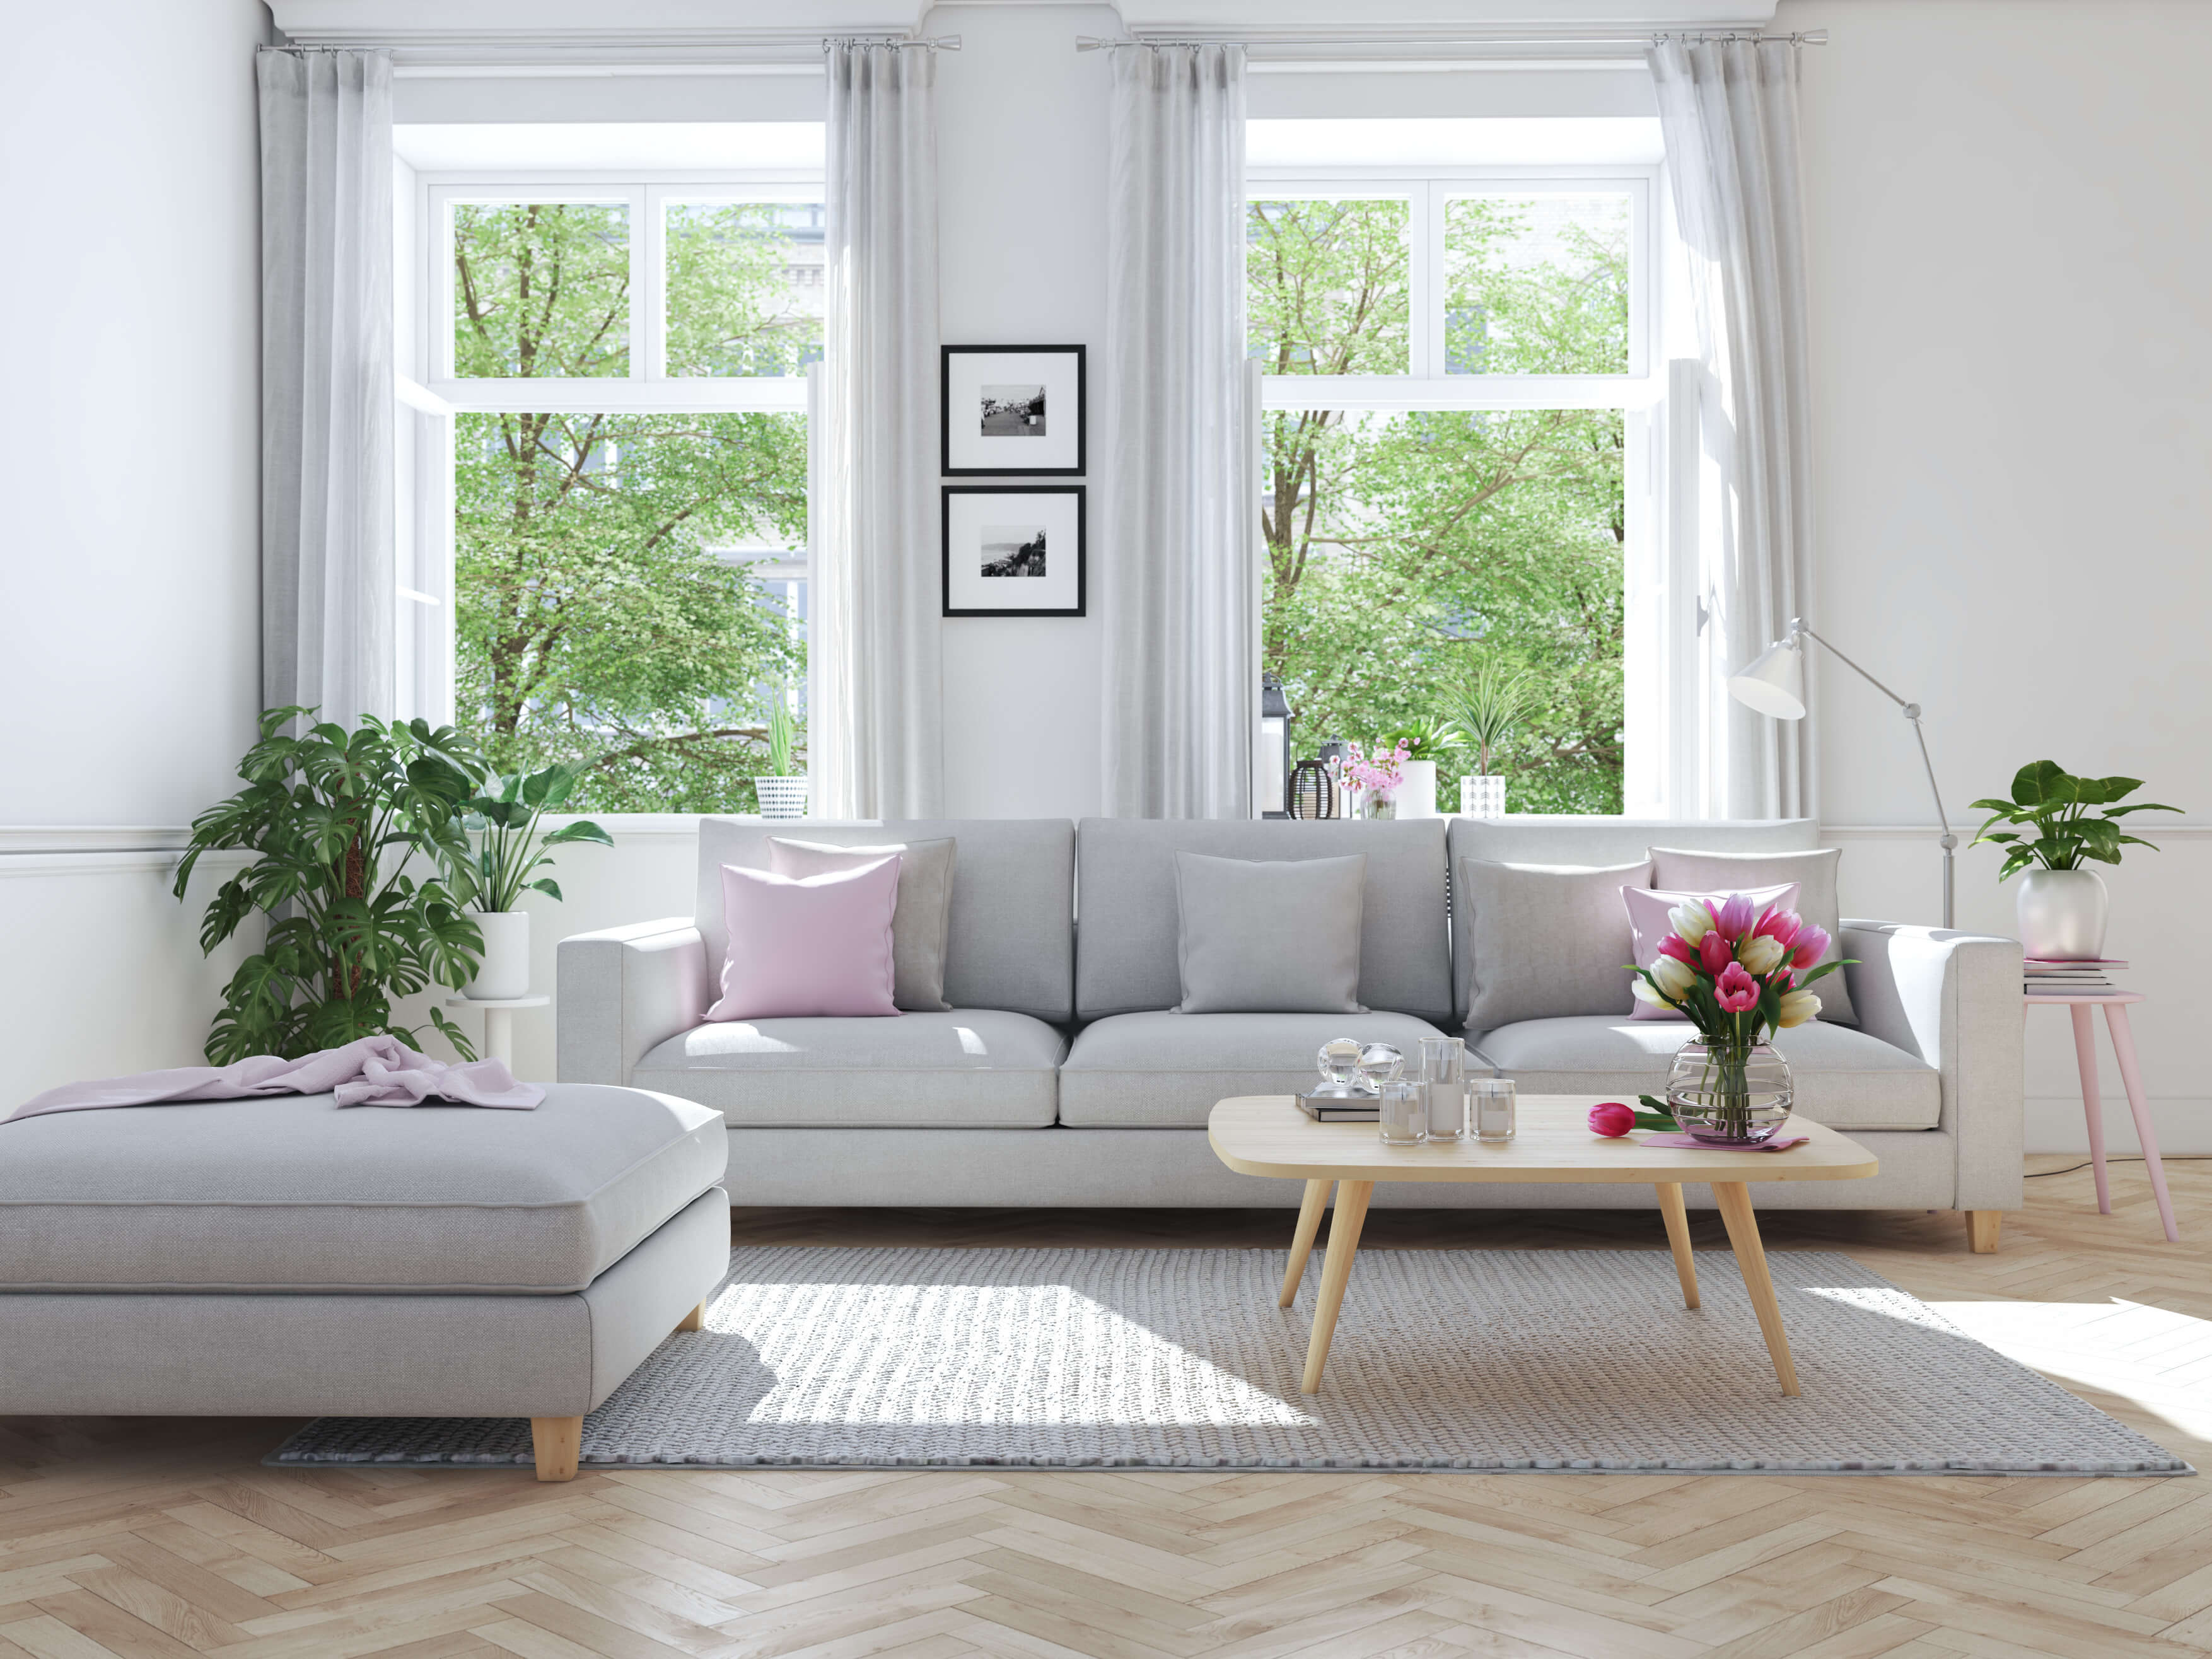 4 Tips For Refreshing Your Living Room For Spring.